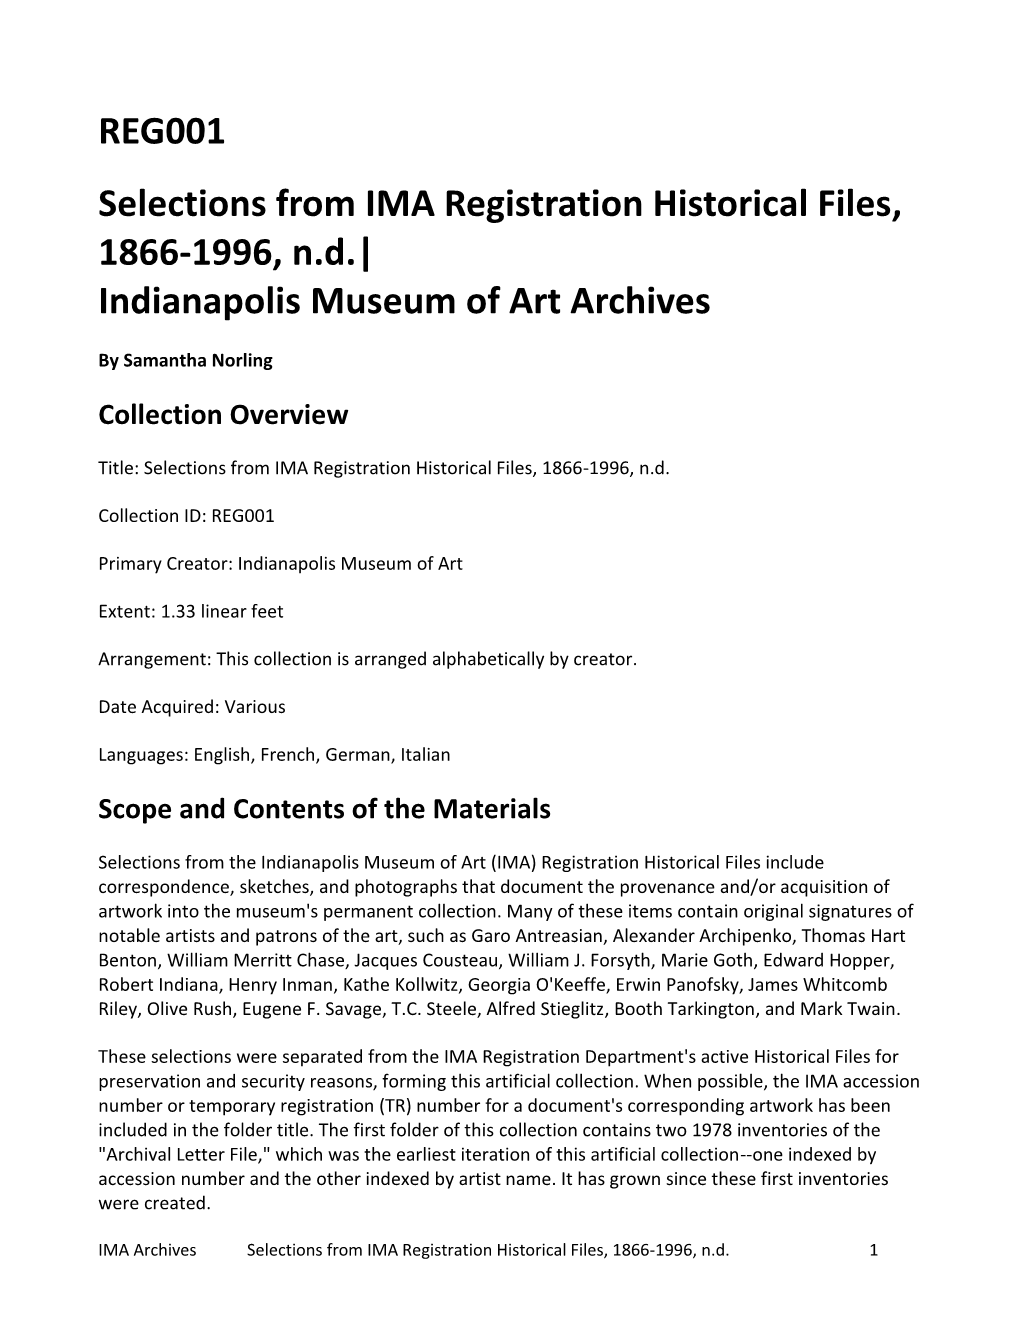 REG001 Selections from IMA Registration Historical Files, 1866-1996, N.D.| Indianapolis Museum of Art Archives